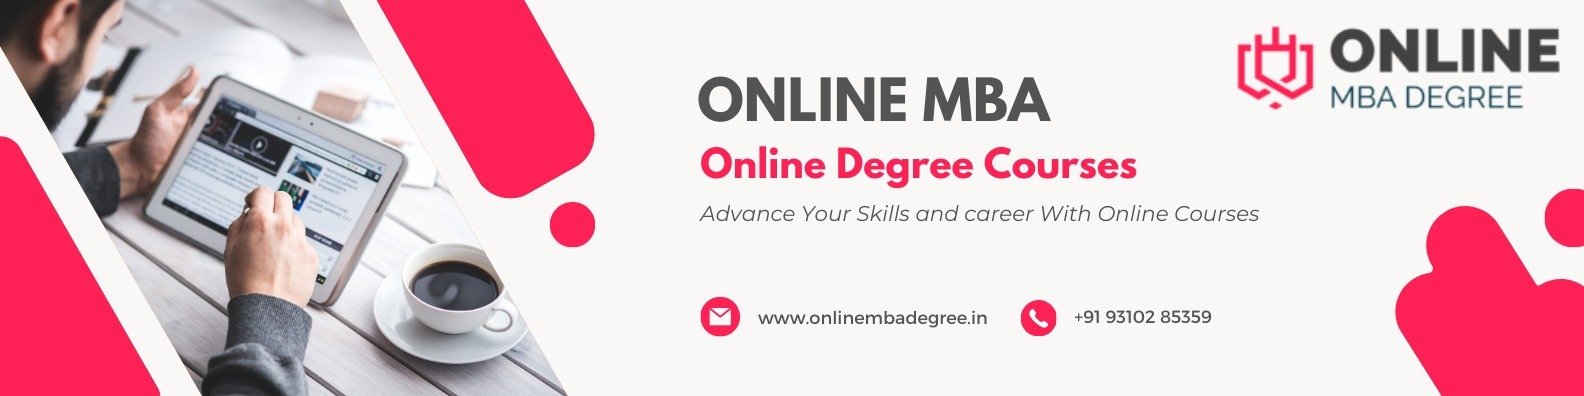 Online MBA Degree for Working Professionals in India